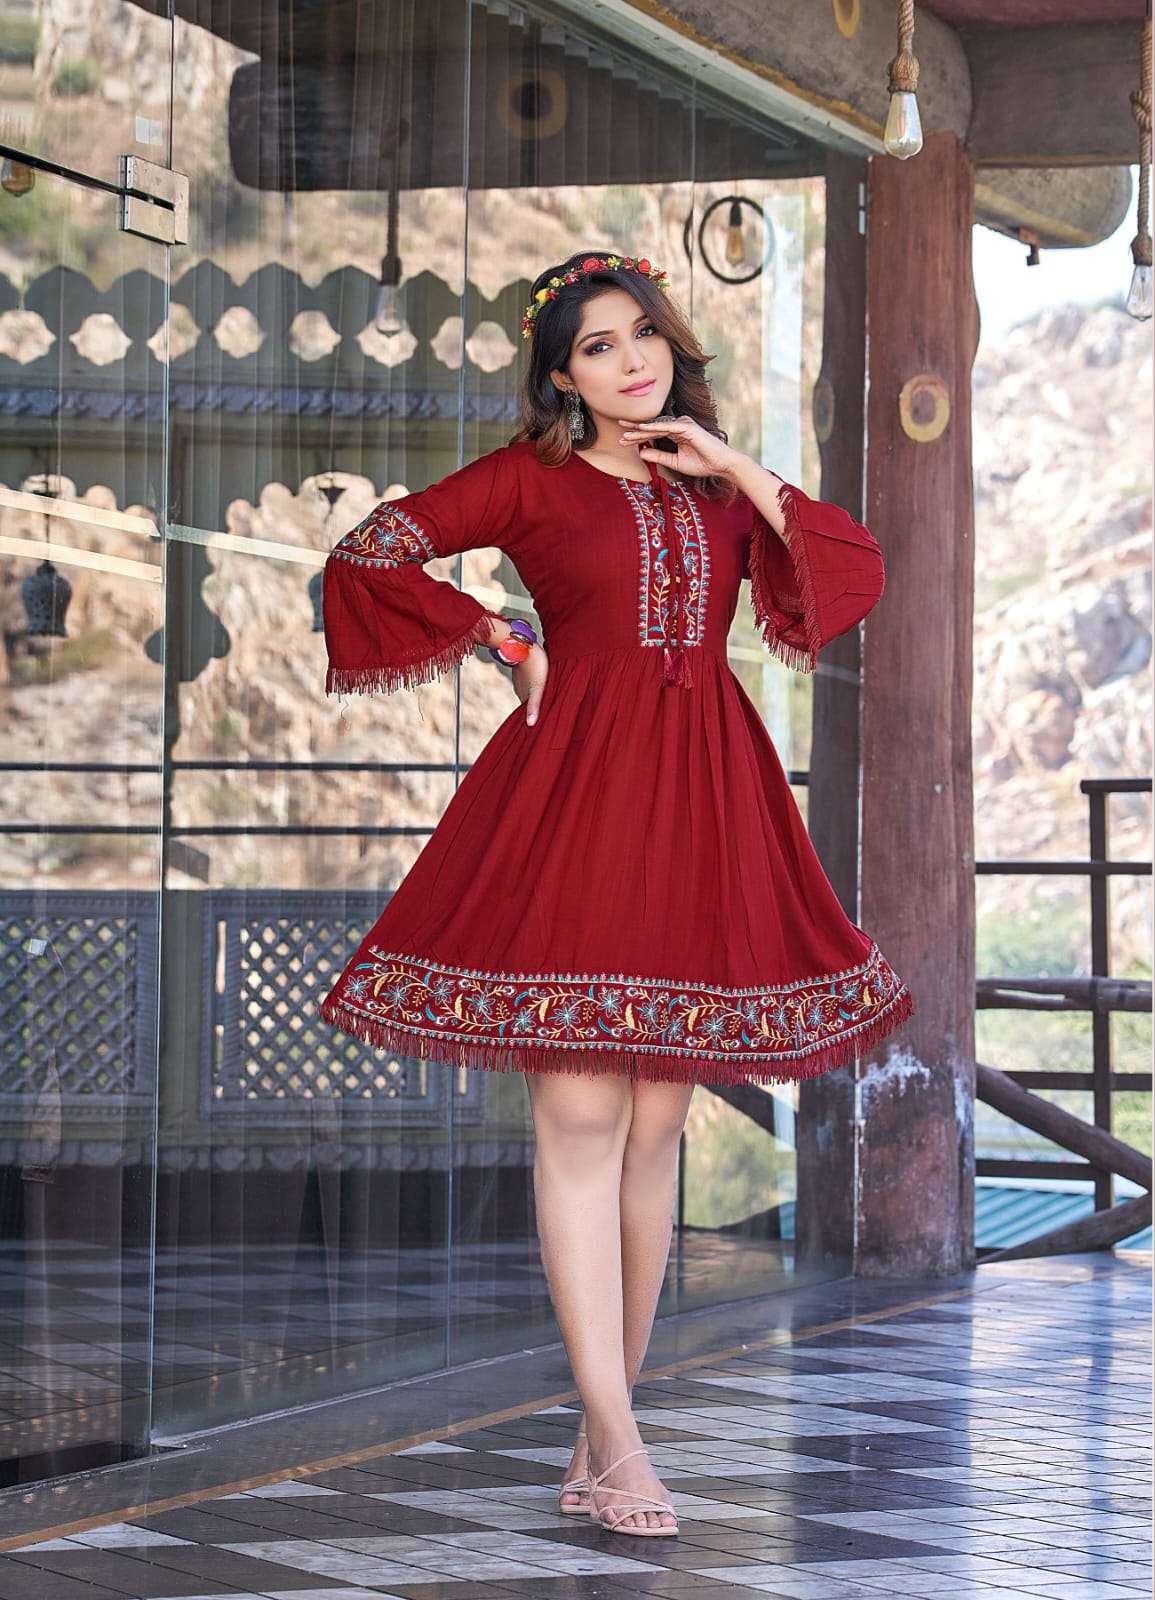 OSSM PRESENT CHERRY REYON  HEAVY EMBROIDRY WORK WITH LACE ON WHOLESALE 